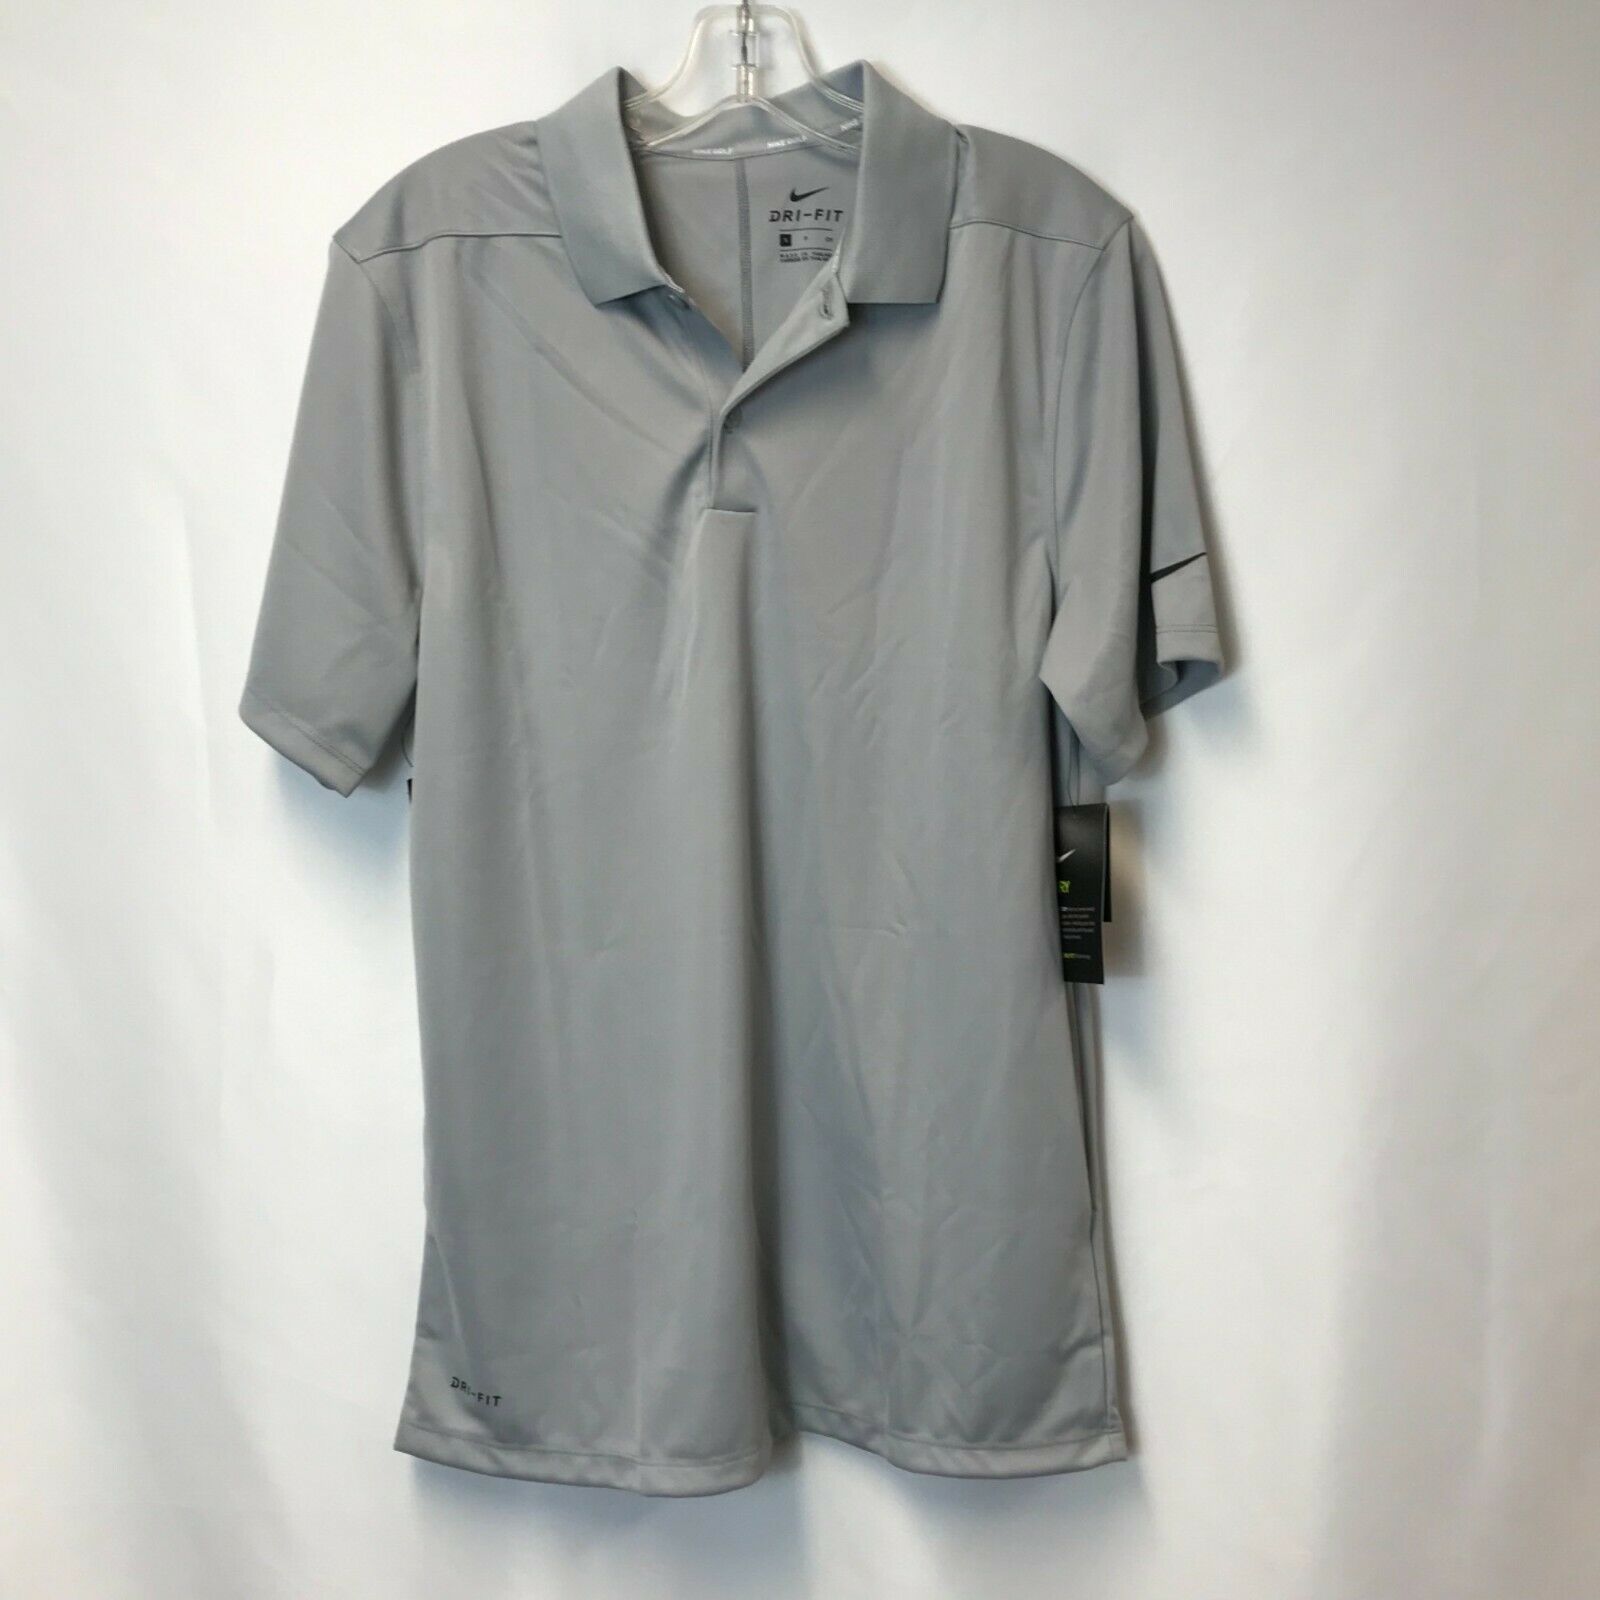 Primary image for Nike Men's Dry Victory Solid Polo Golf Shirt (Size Small)